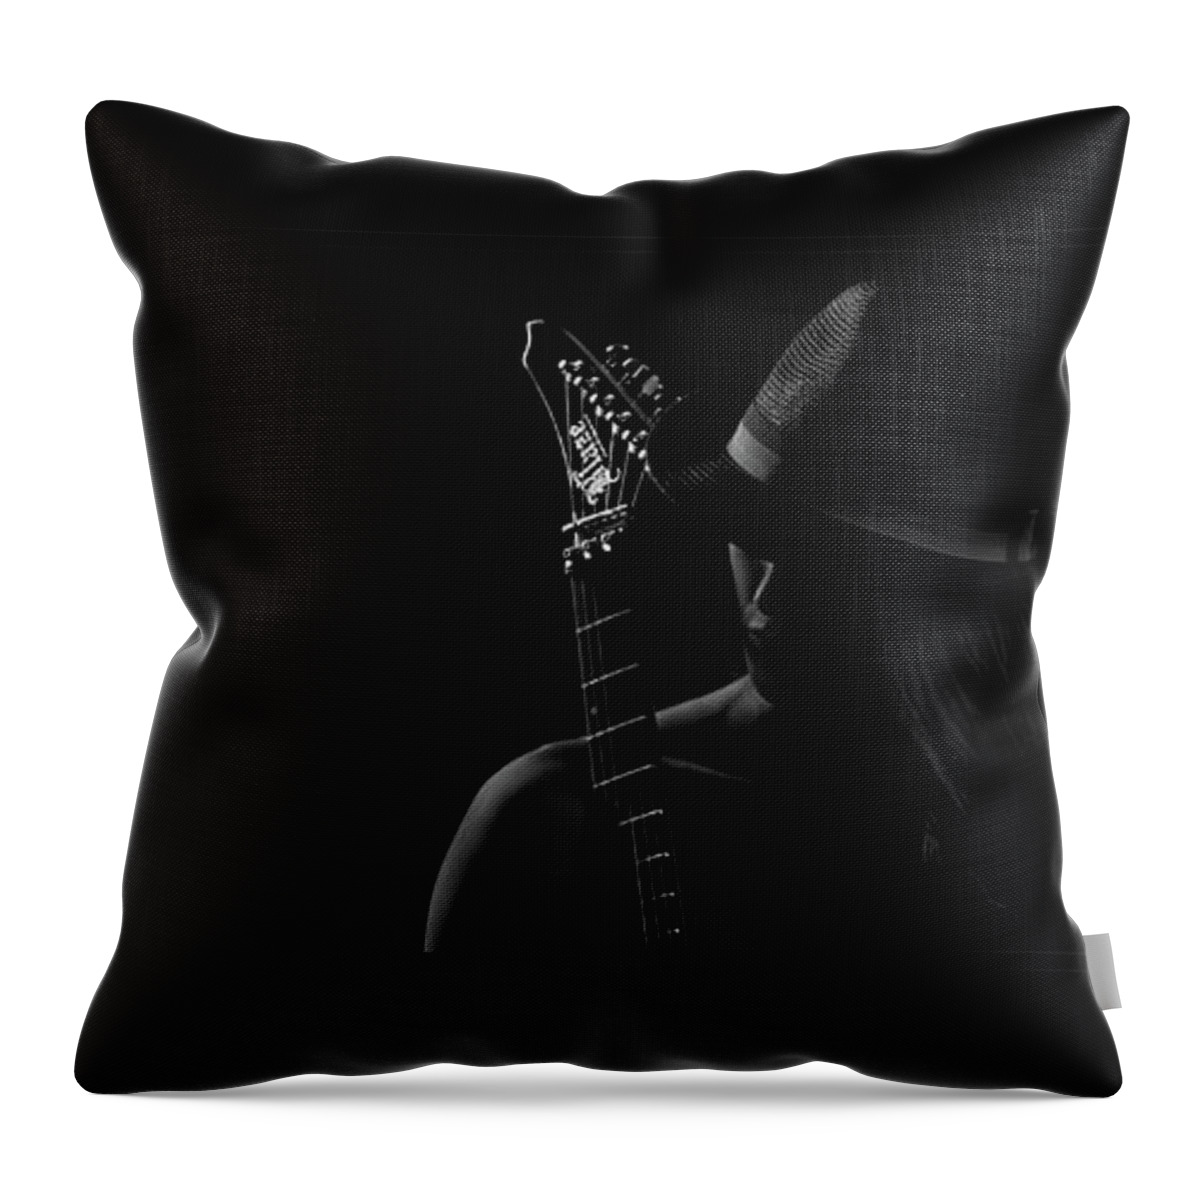 Guitar Throw Pillow featuring the photograph While My Guitar Gently Weeps by Brad Barton